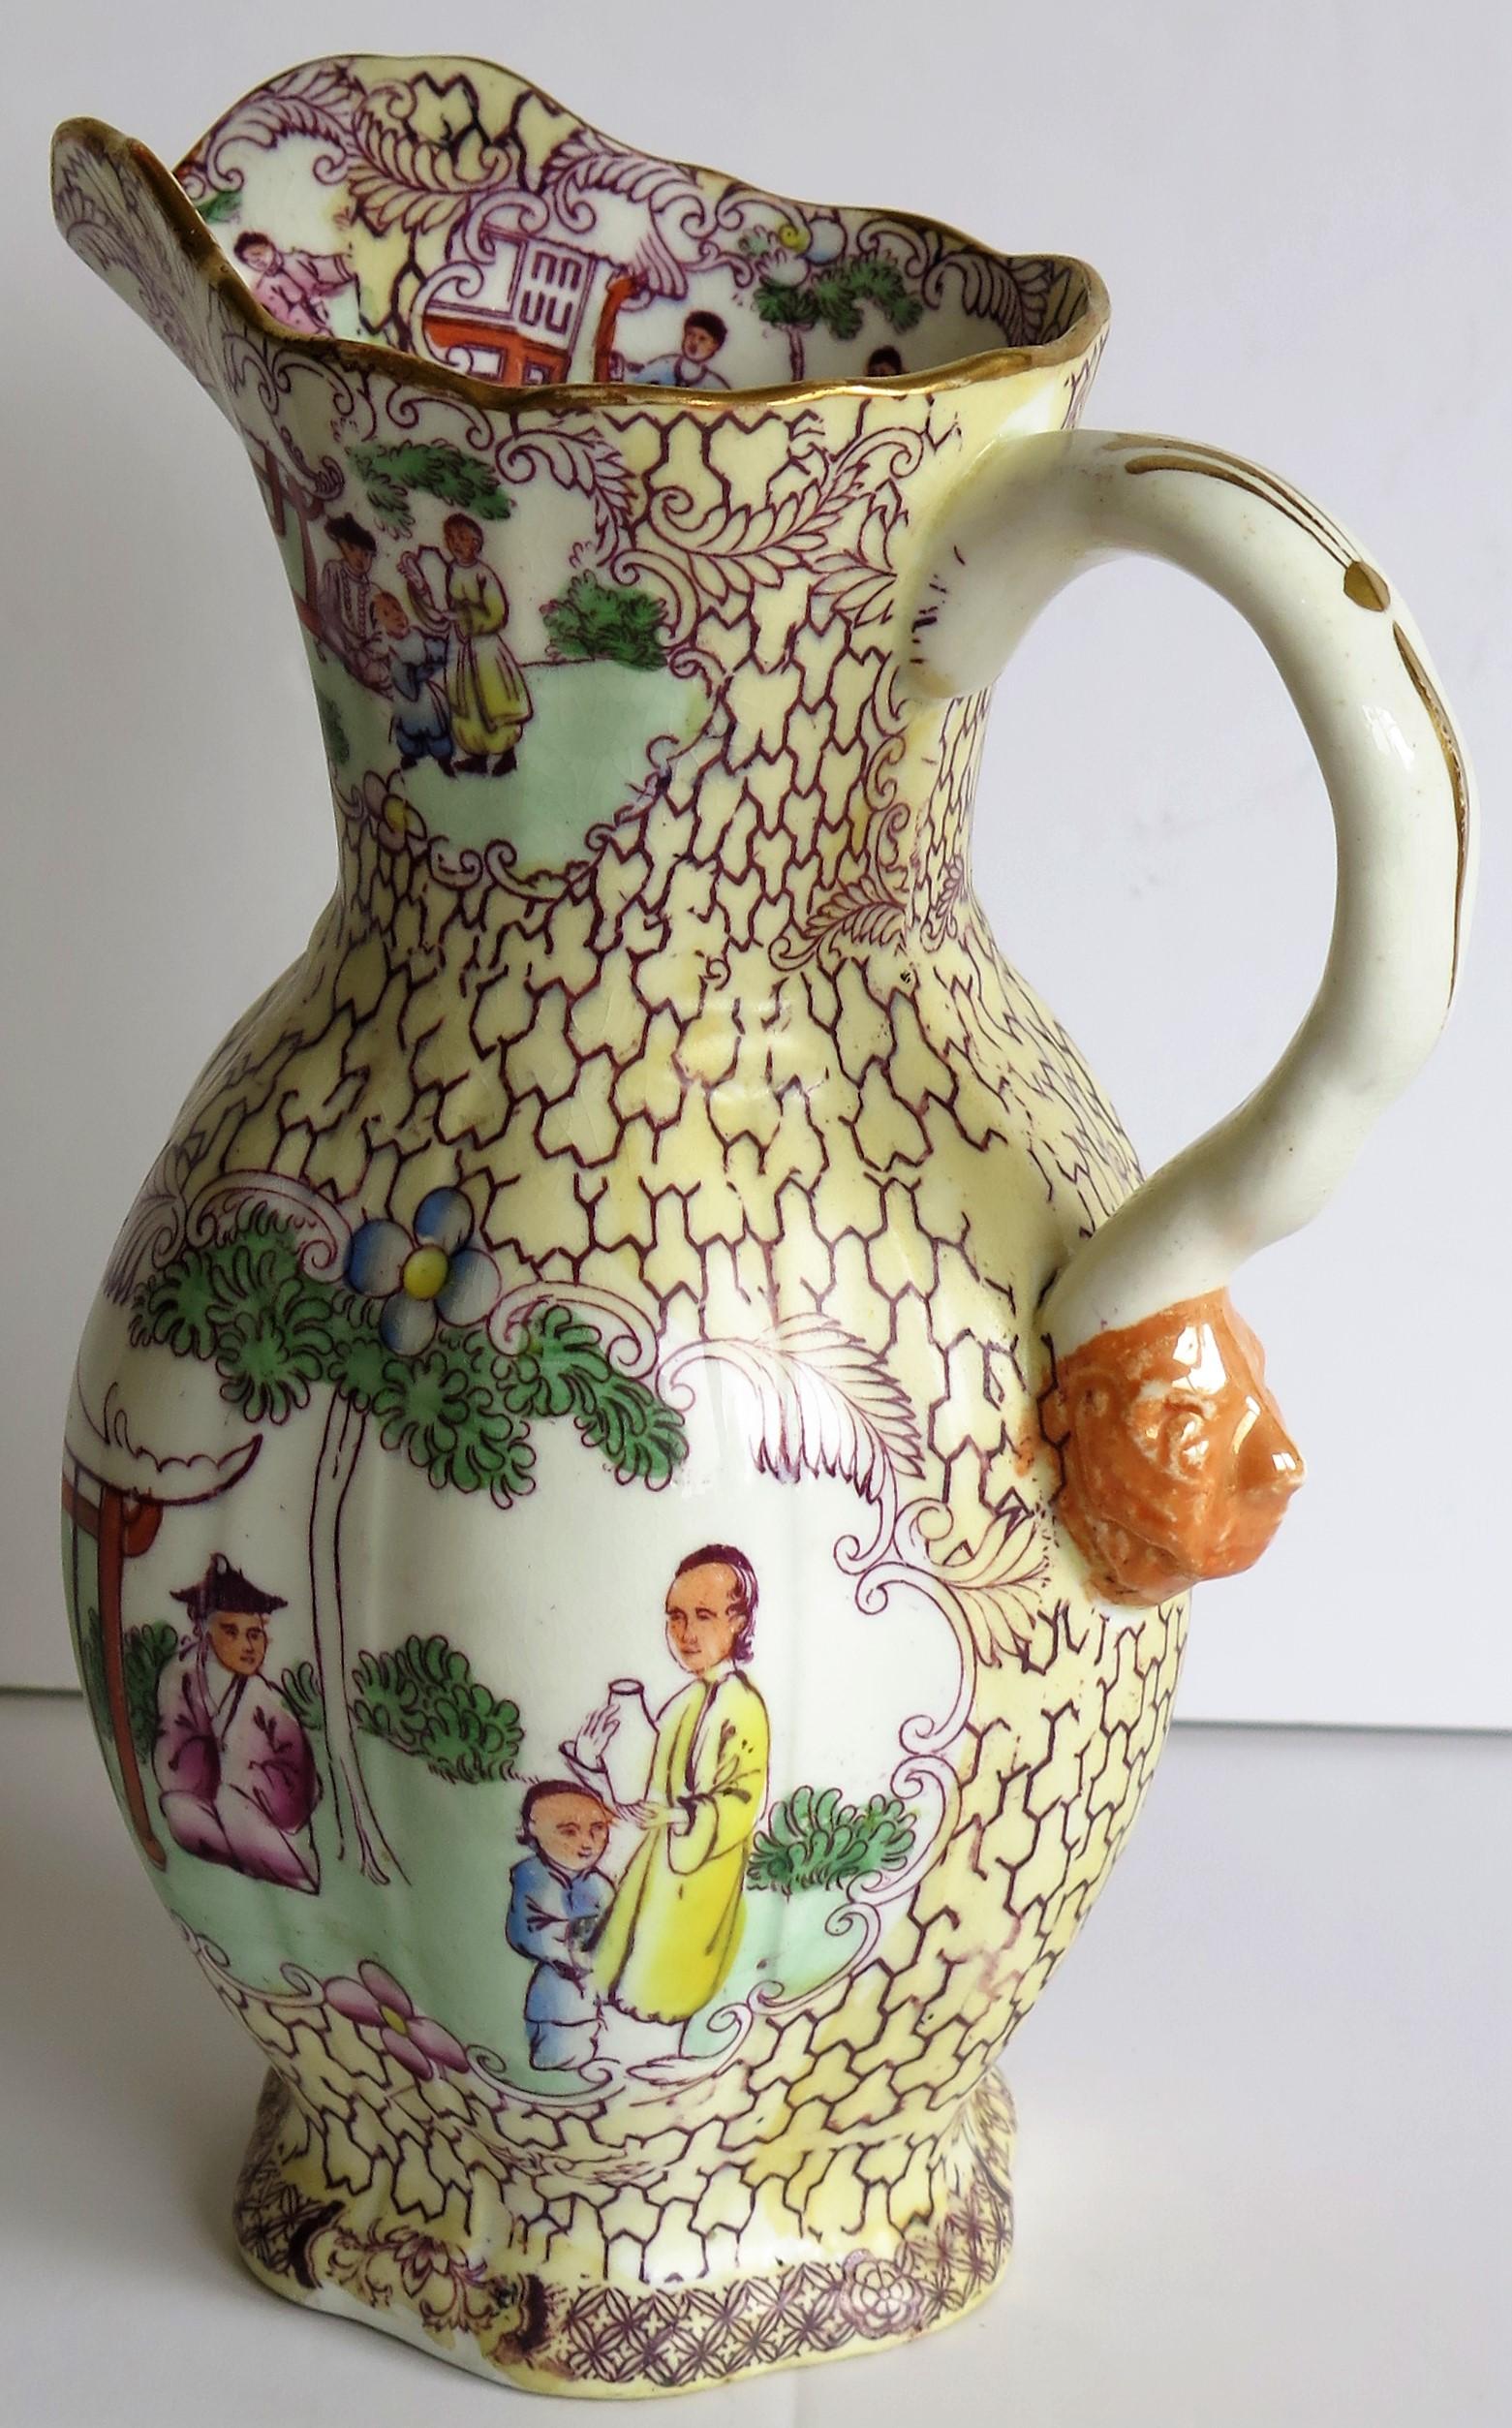 This is a superb Ironstone Jug or Pitcher made by the English Mason's Ironstone factory, dating to the late Georgian period, circa 1825.

The jug shape and pattern colorway are both rare.

The body is hexagonal in form, having a waisted central